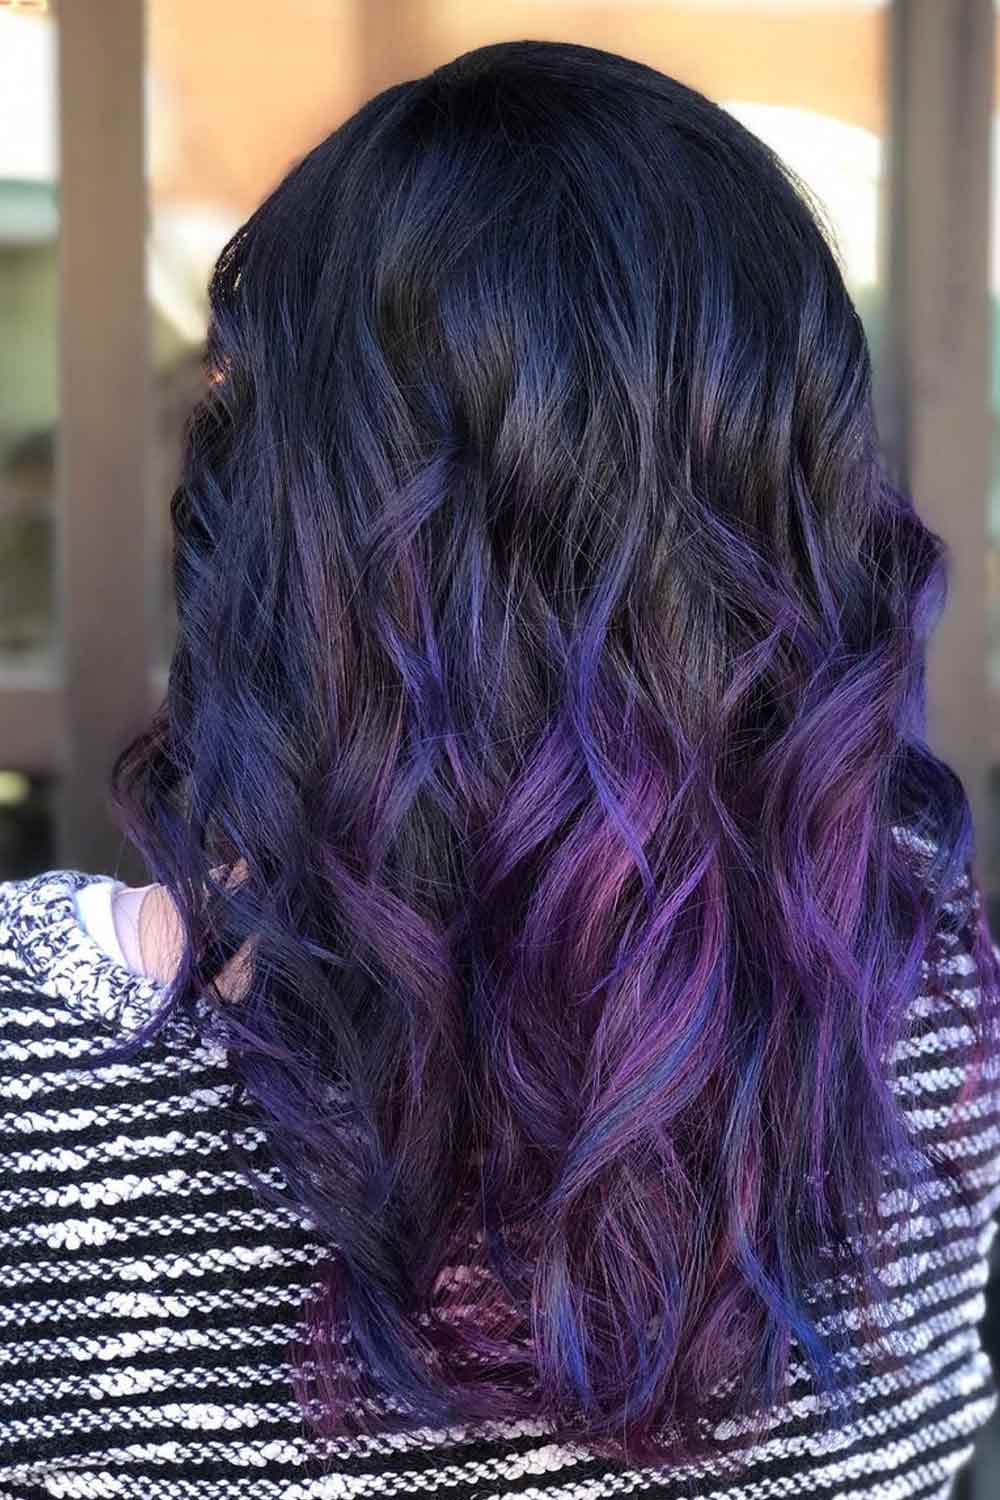 Dark Hair with Blue and Purple Highlights